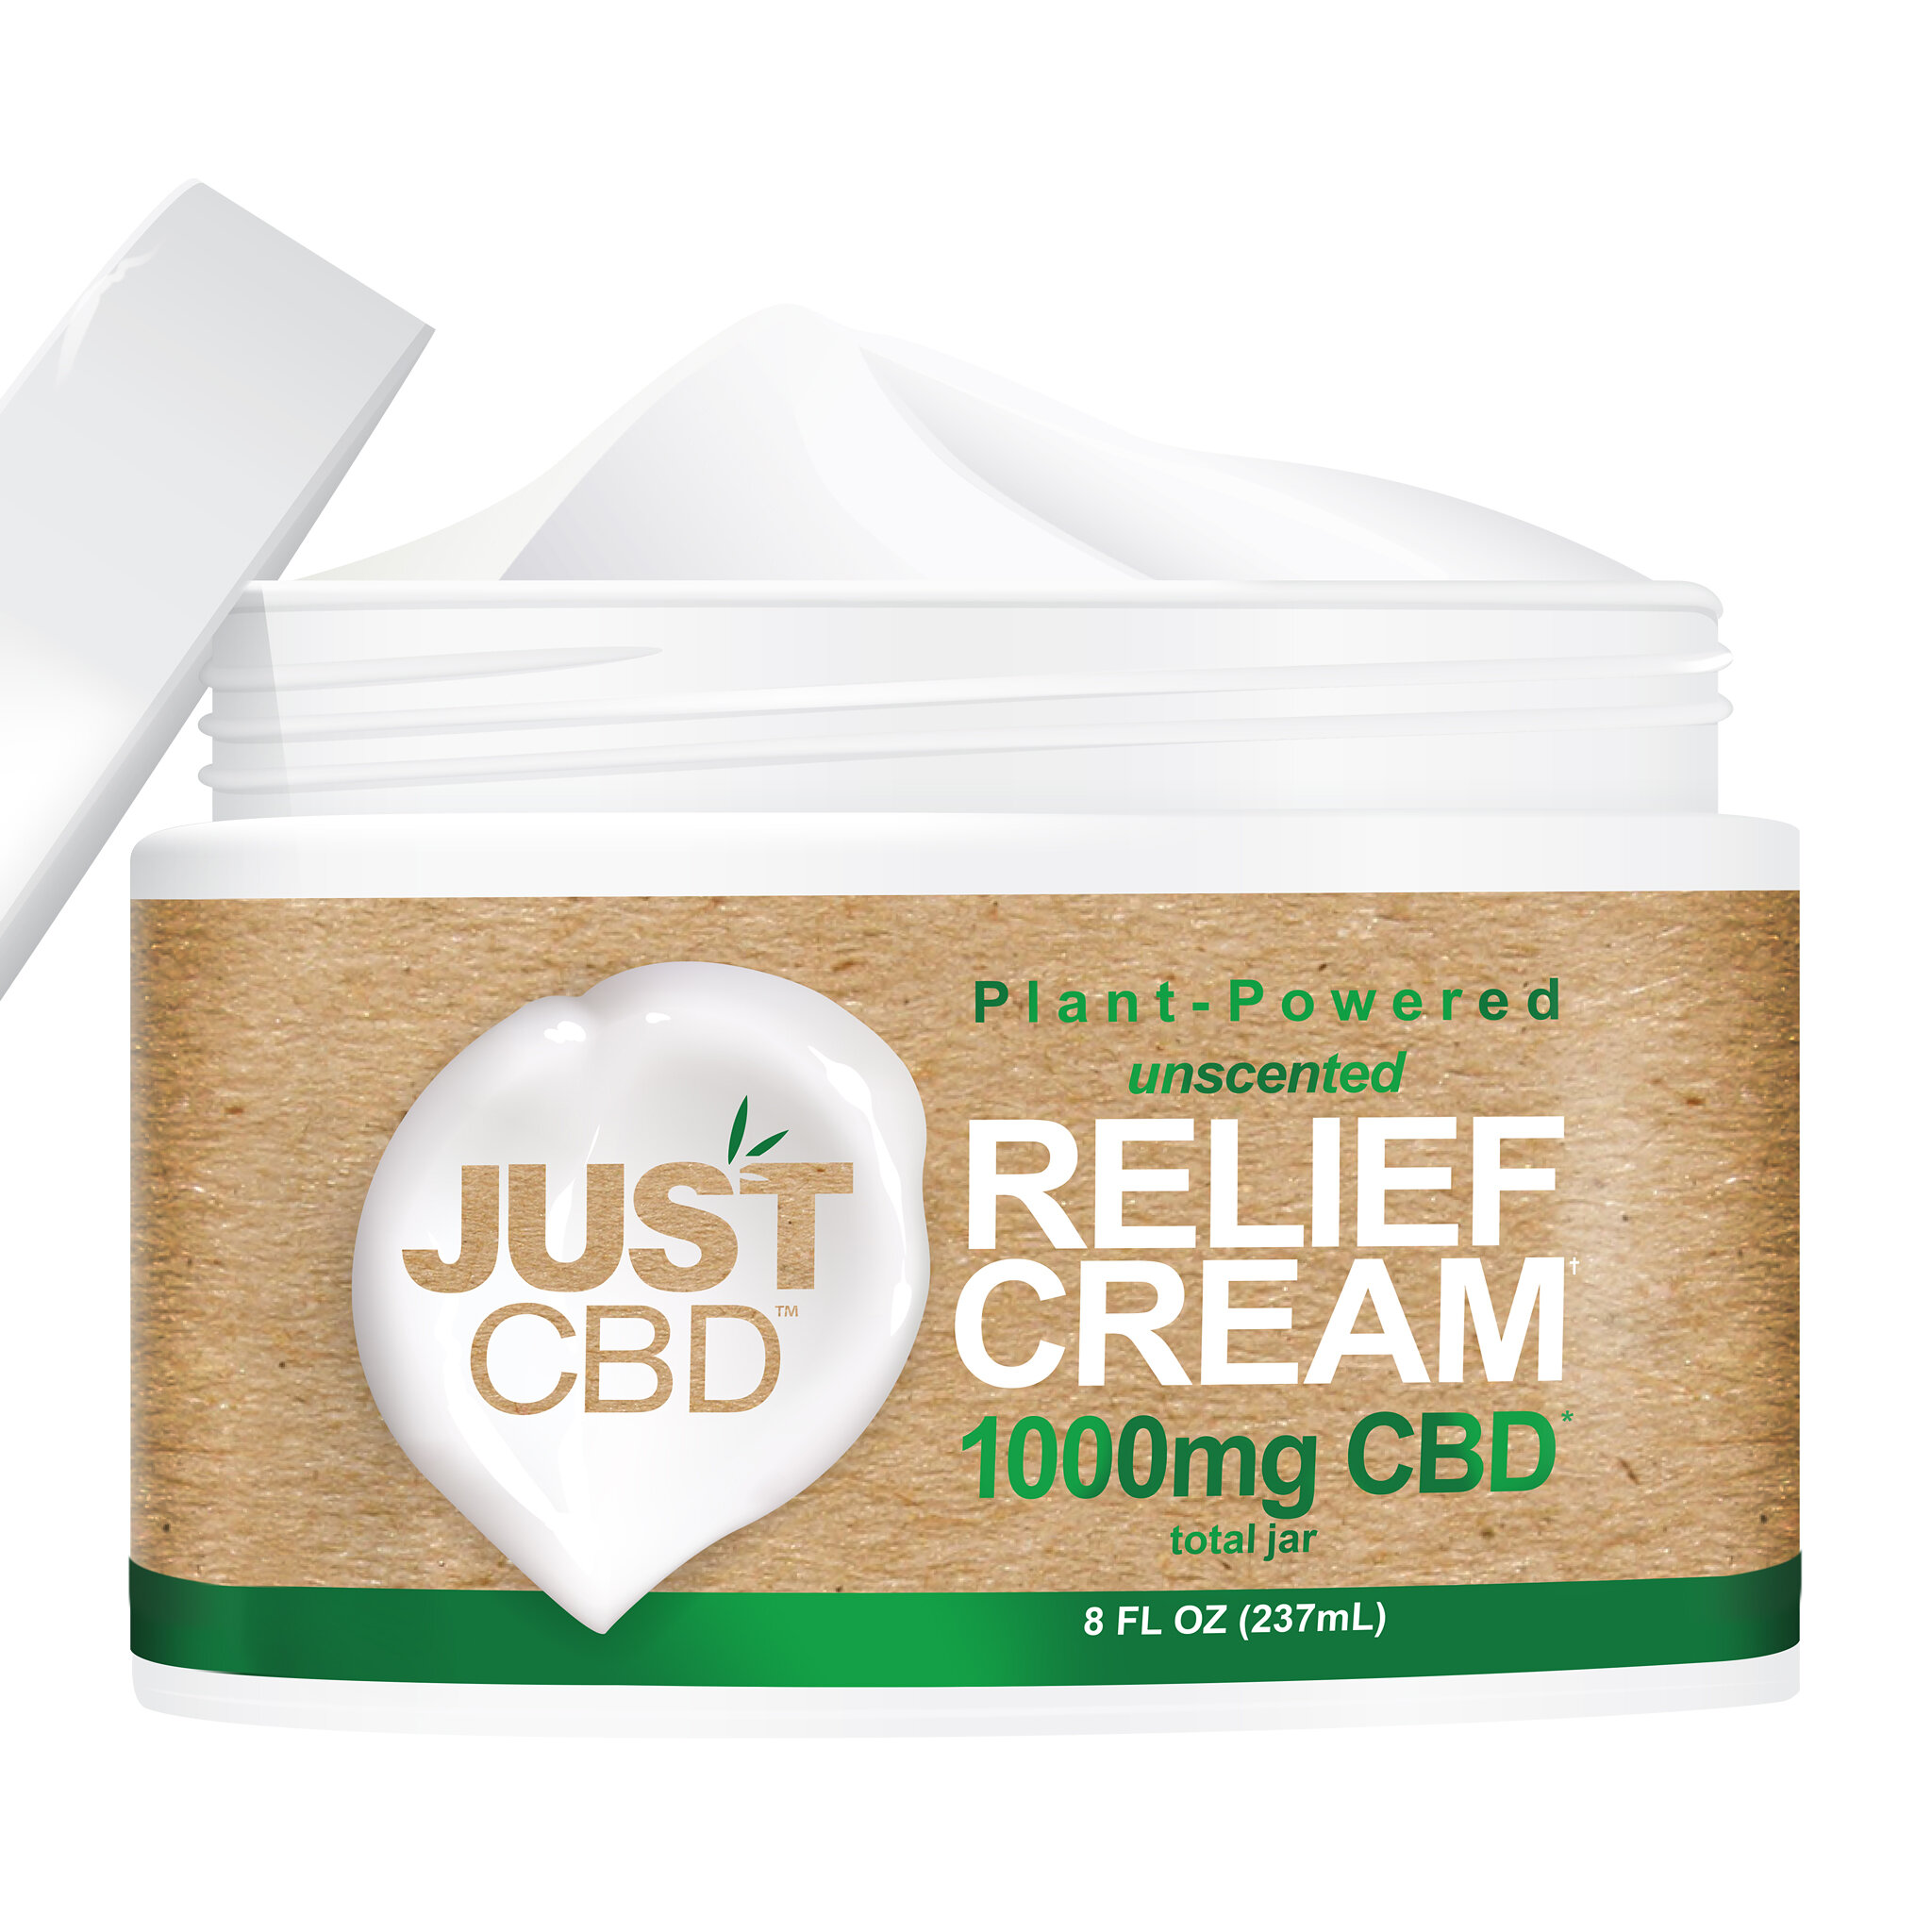 GREEN EARTH MEDICINALS CBD RELIEF CREAM - Cbd|Pain|Cream|Products|Relief|Creams|Hemp|Product|Skin|Oil|Arthritis|Ingredients|Body|Topicals|Muscle|Effects|Inflammation|Brand|People|Spectrum|Health|Oils|Salve|Thc|Quality|Benefits|Menthol|Way|Joints|Aches|Research|Potency|Results|Creams|Plant|Cannabinoids|Brands|Naturals|Cons|Muscles|Cbd Cream|Cbd Creams|Pain Relief|Cbd Products|Cbd Topicals|Cbd Oil|Fab Cbd|Joint Pain|Full Spectrum Cbd|Cbd Pain Cream|Chronic Pain|United States|Cbd Oils|Topical Products|Rheumatoid Arthritis|Topical Cbd Cream|Endocannabinoid System|Pain Relief Cream|Green Roads|Pain Management|Full-Spectrum Cbd|Joy Organics|Cbd Pain Relief|Topical Cream|Topical Cbd Products|Essential Oils|Cheef Botanicals|Cbd Isolate|Side Effects|Cbd Costs